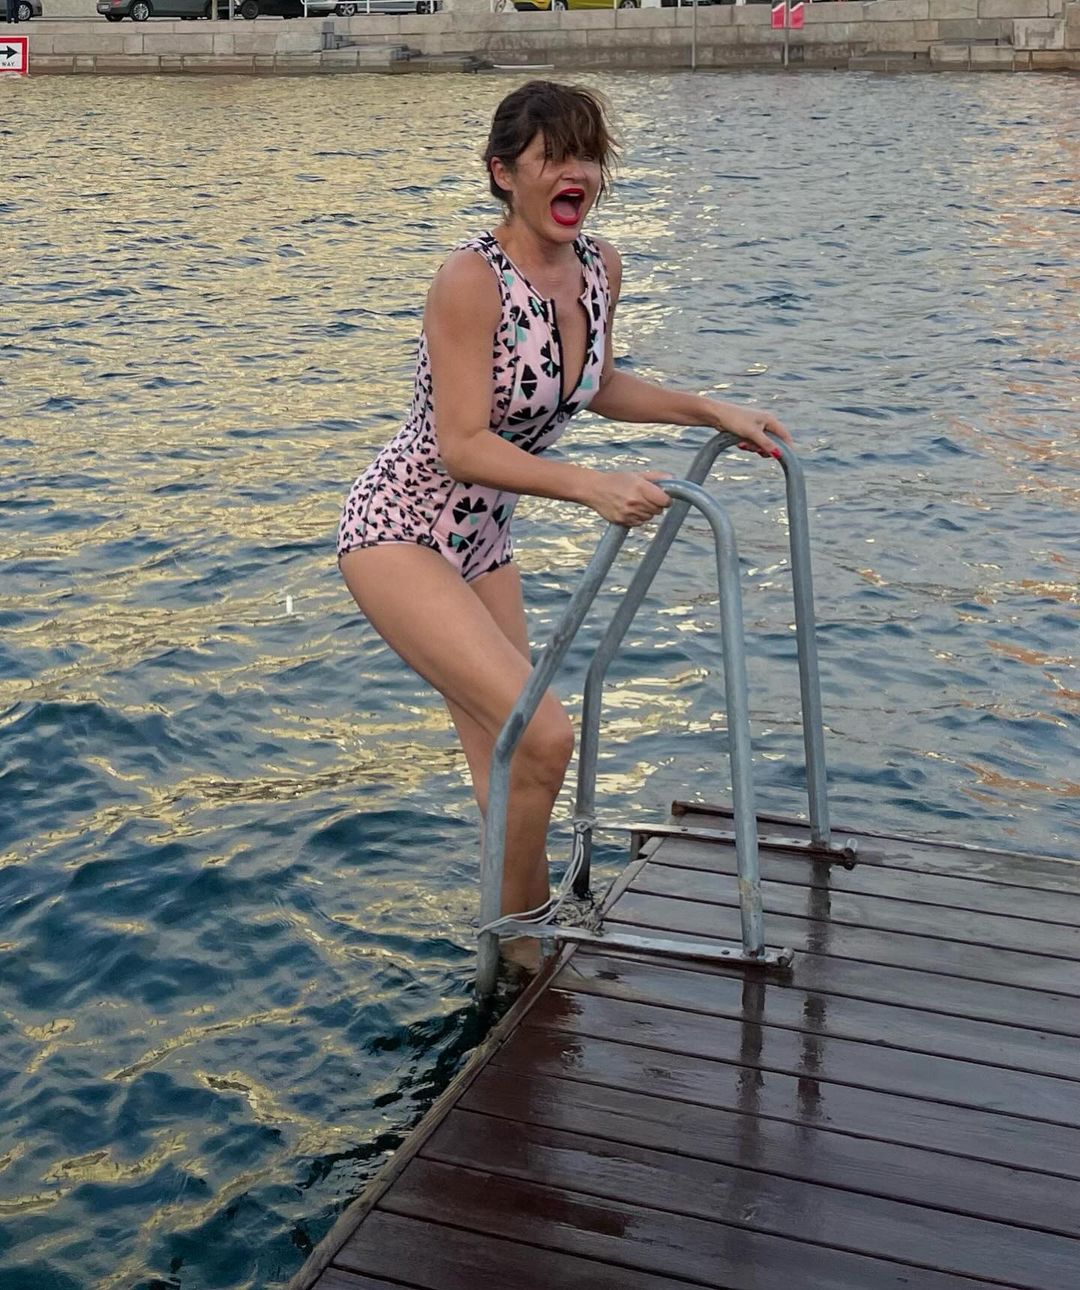 Helena Christensen Keeps Her Cold Plunge Tradition Going! - Photo 1